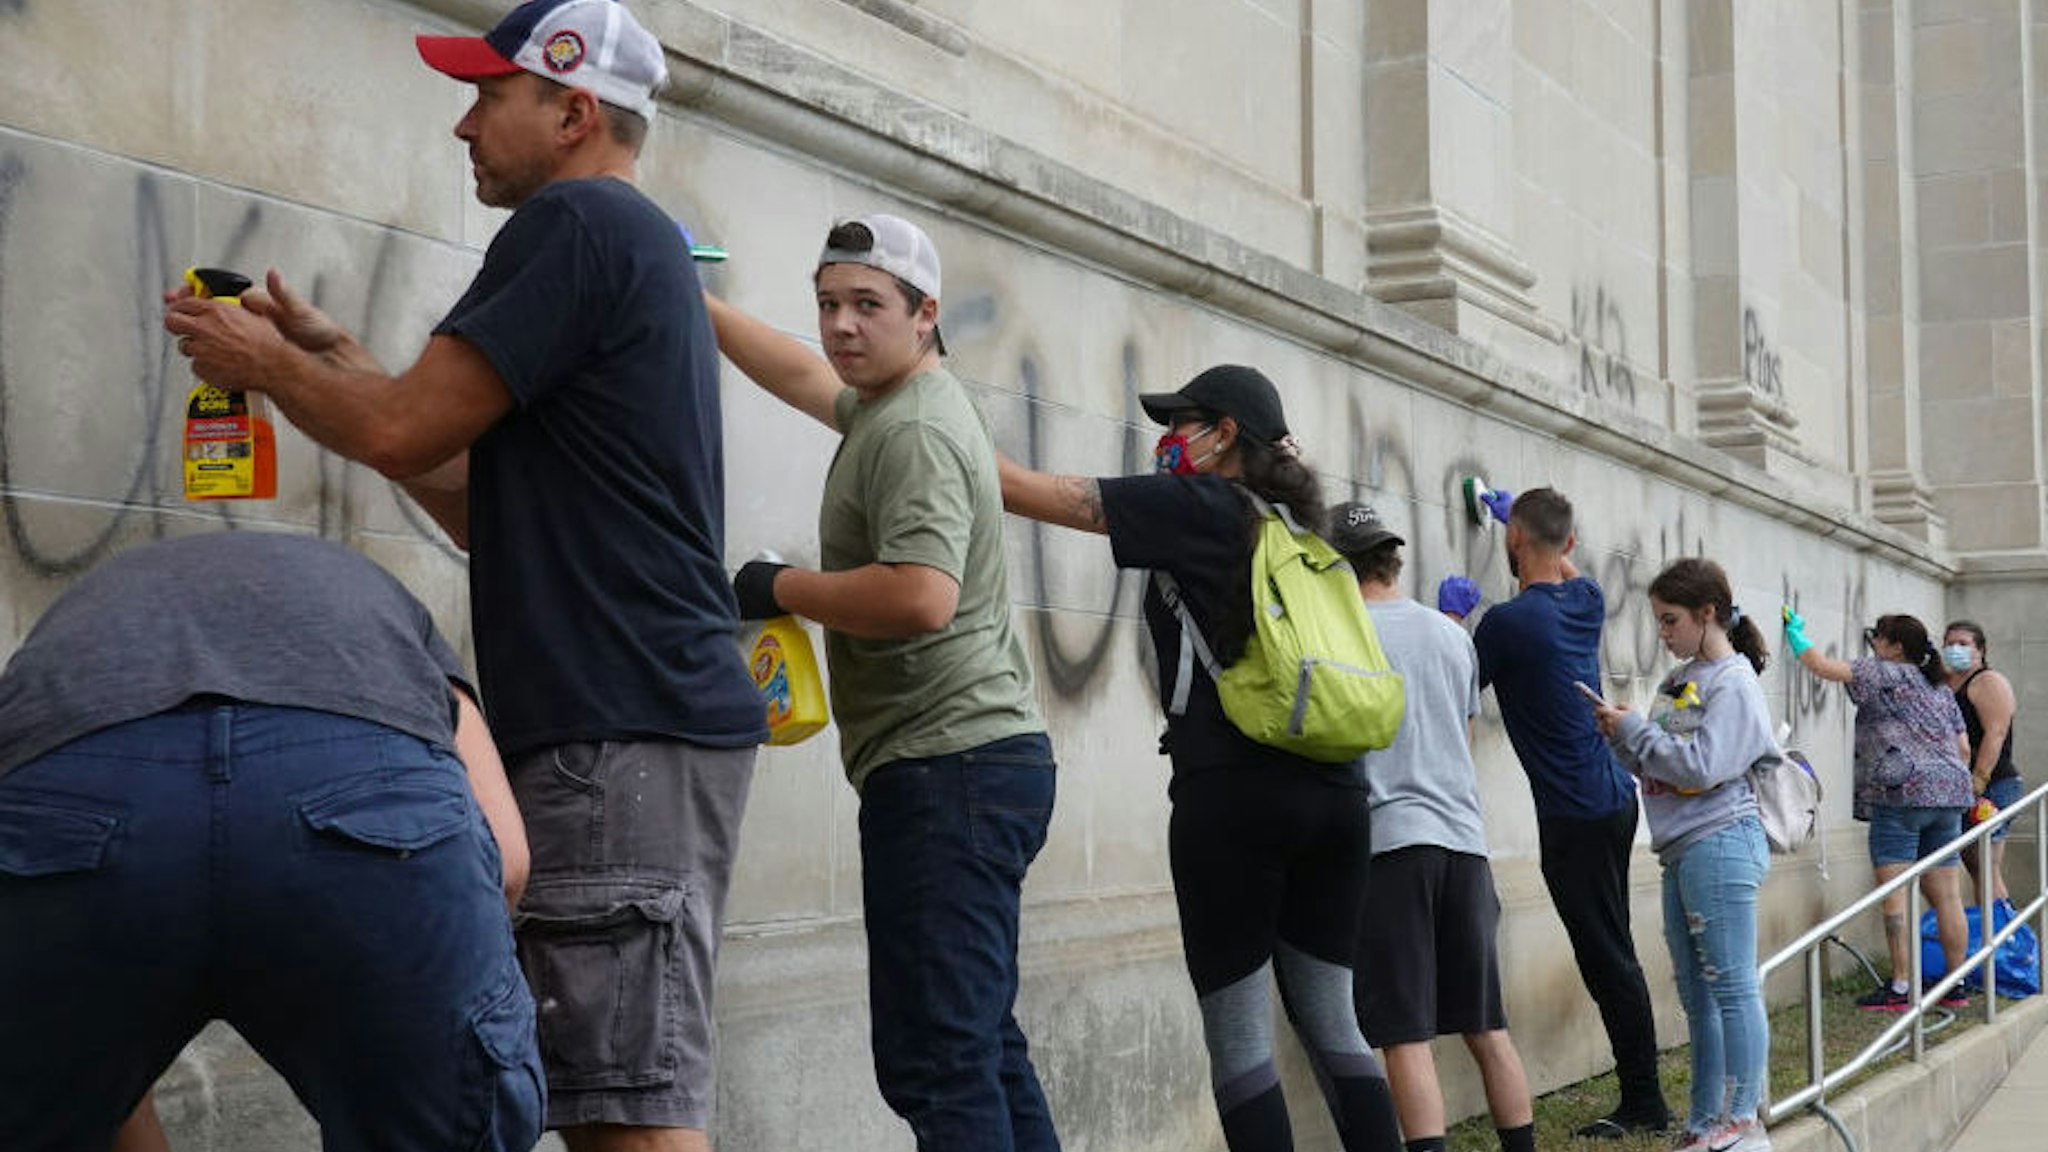 Volunteers clean graffiti from a high school near the Kenosha County Courthouse following another night of unrest on August 25, 2020 in Kenosha, Wisconsin.